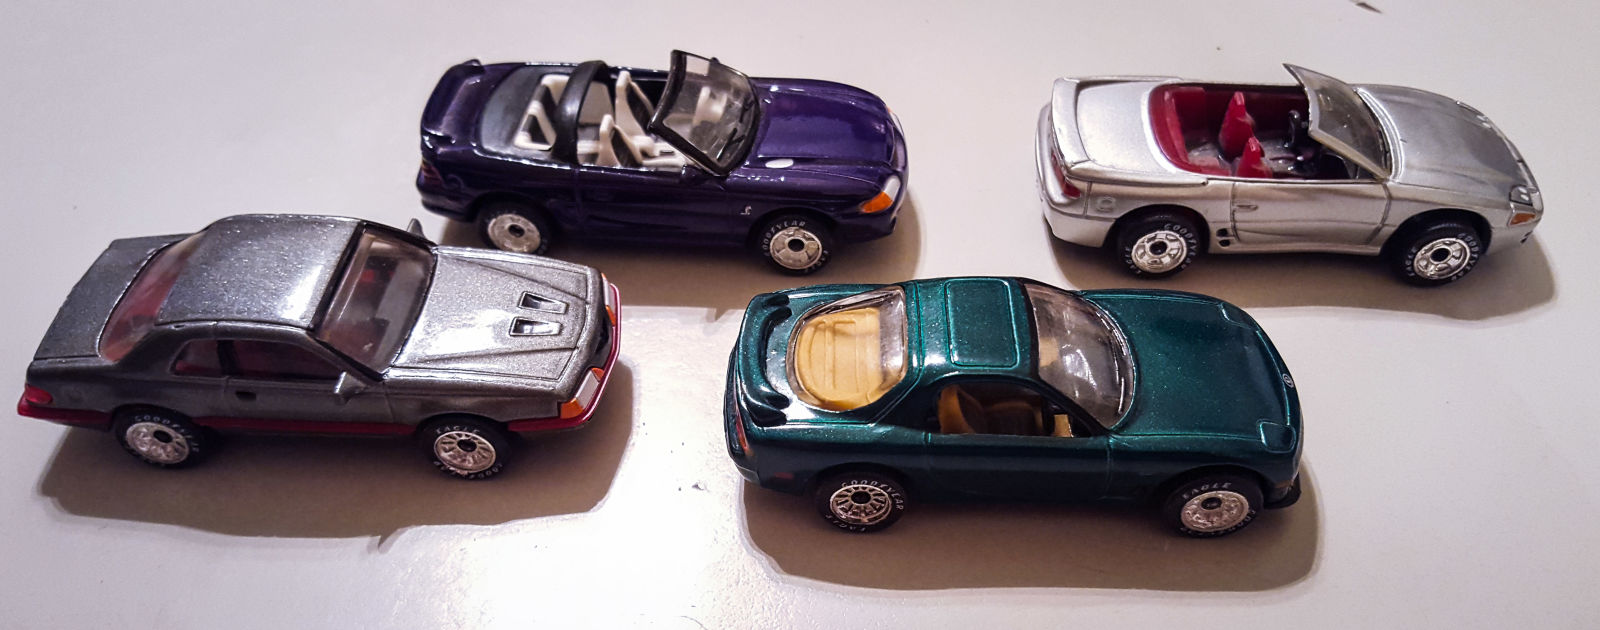 All MBX. Paid $1.69 for the lot of them. Need to be cleaned because they have lots of display dust. Ford T-Bird Turbo Coupe, Mazda RX-7, Mustang Cobra, Mitsubishi 3000GT Spyder